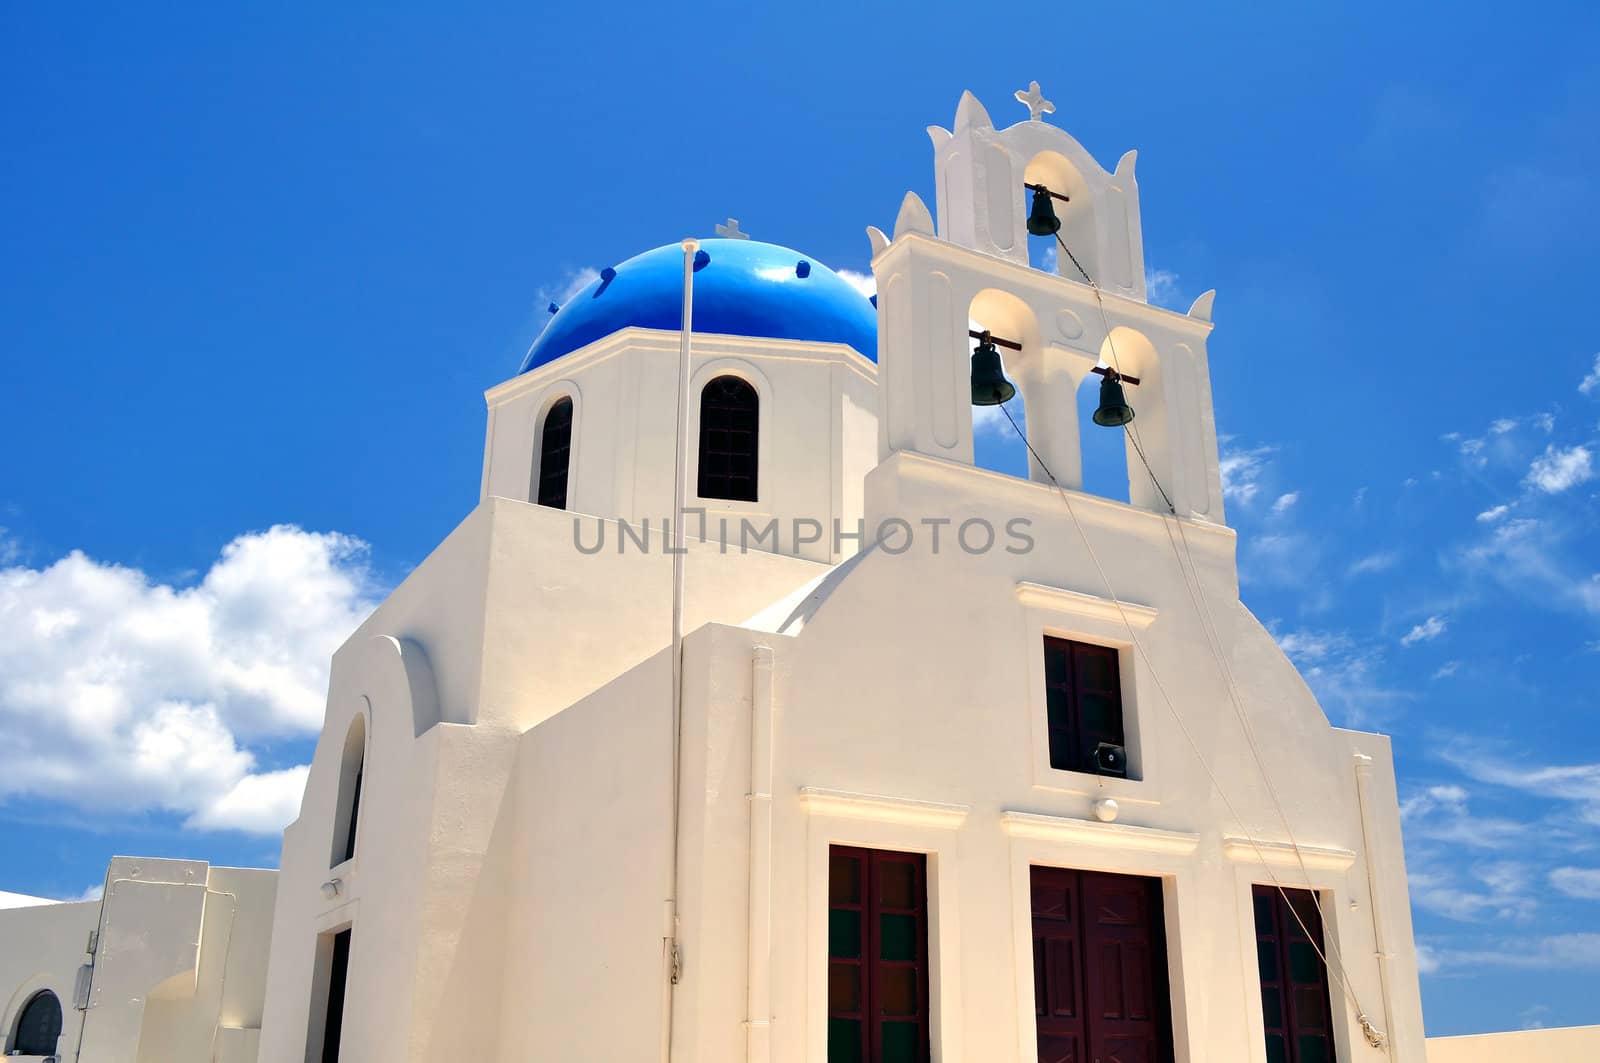 Chapel in Santorini Island by FER737NG